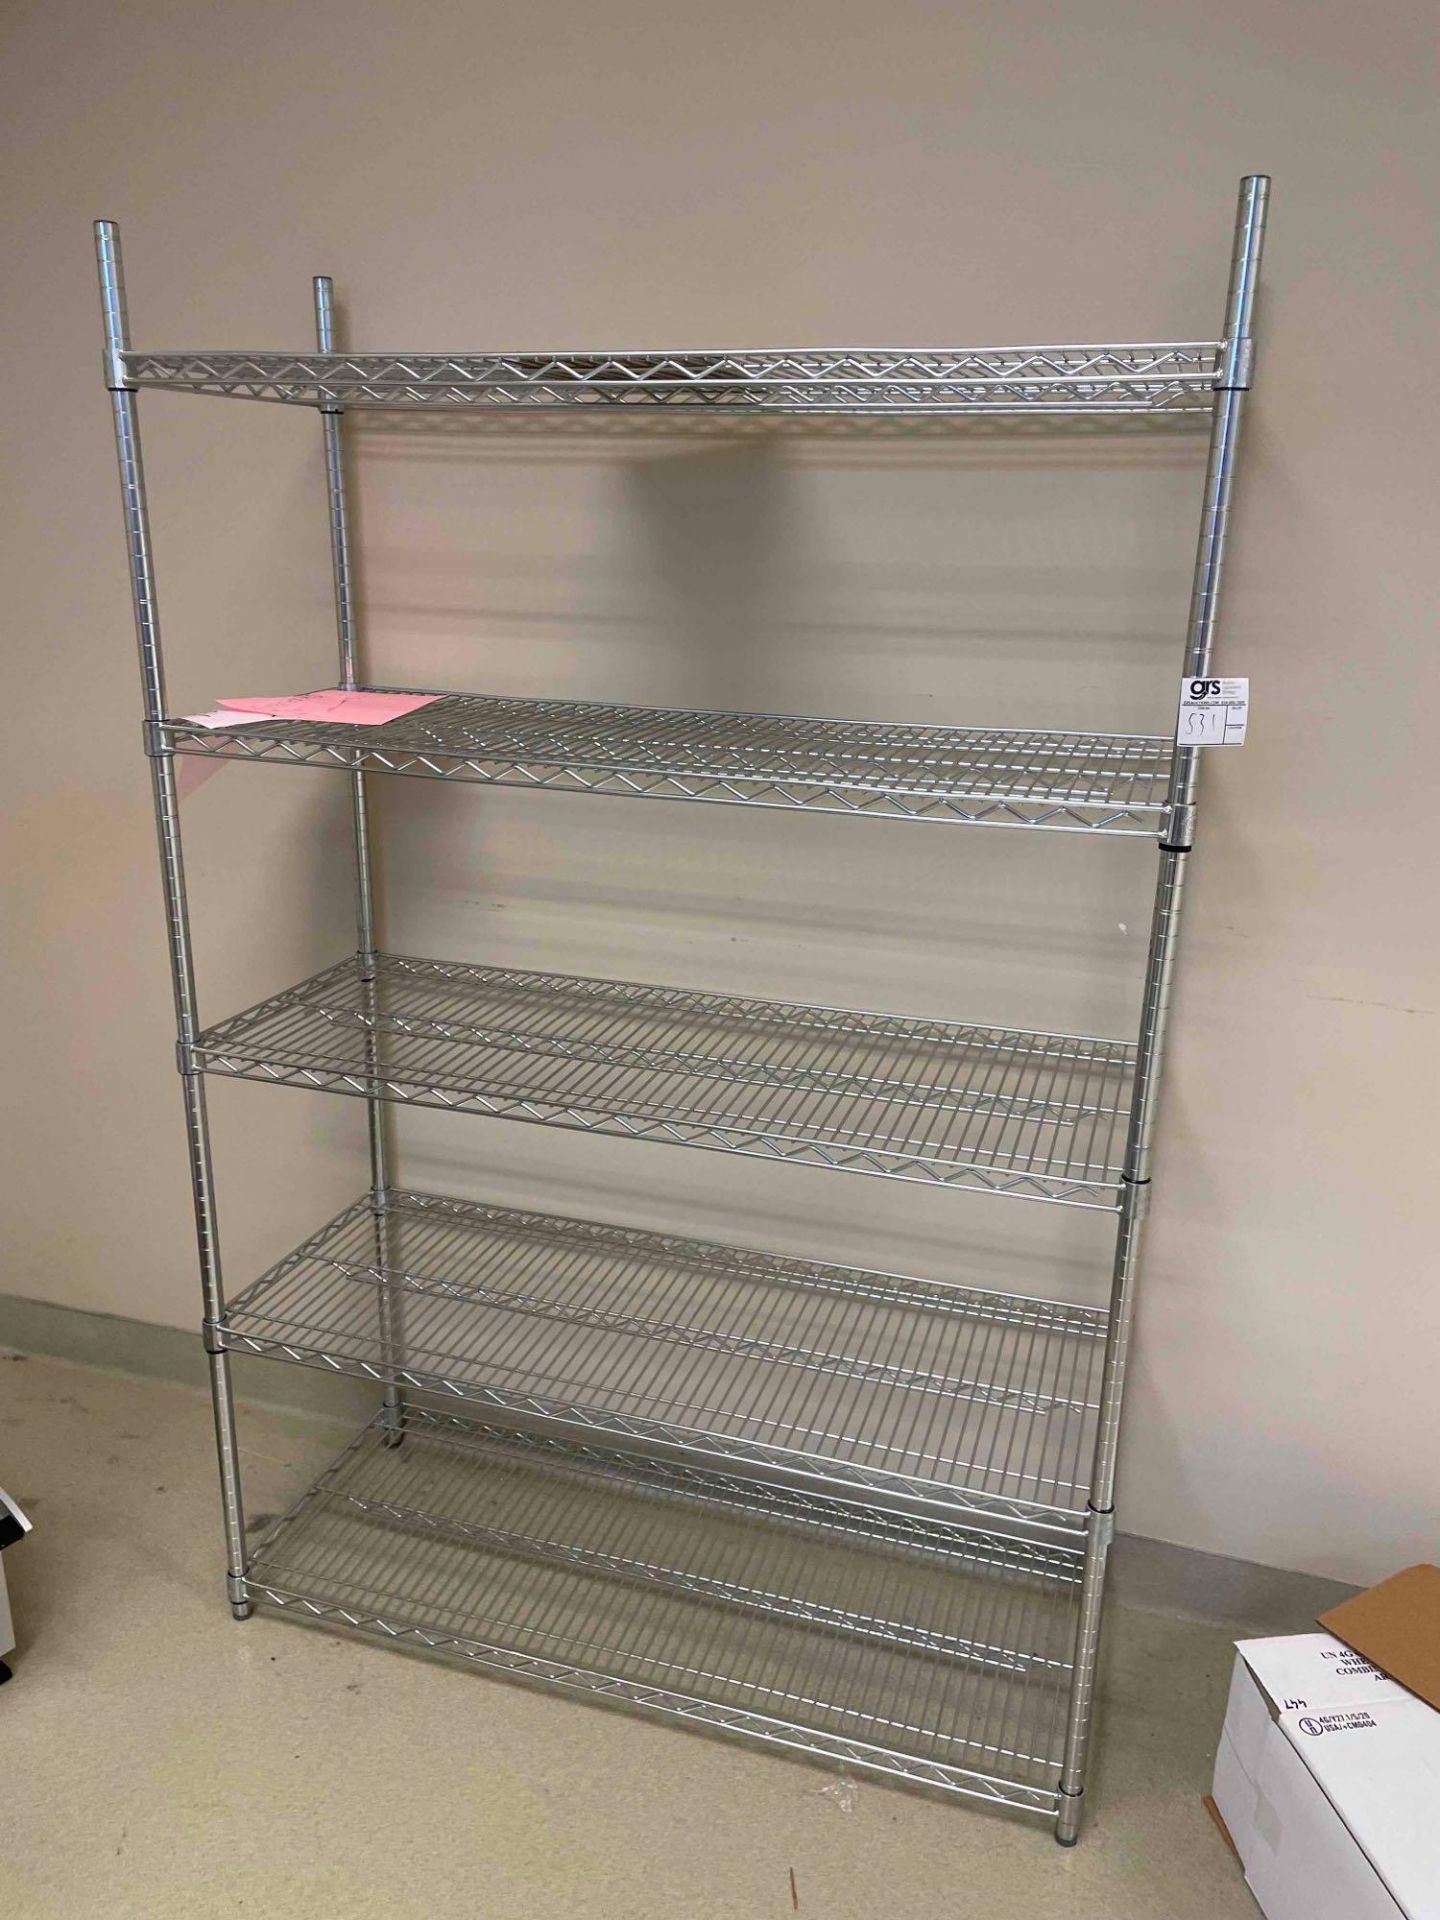 5-Tier Wire Shelving Units - Image 2 of 3